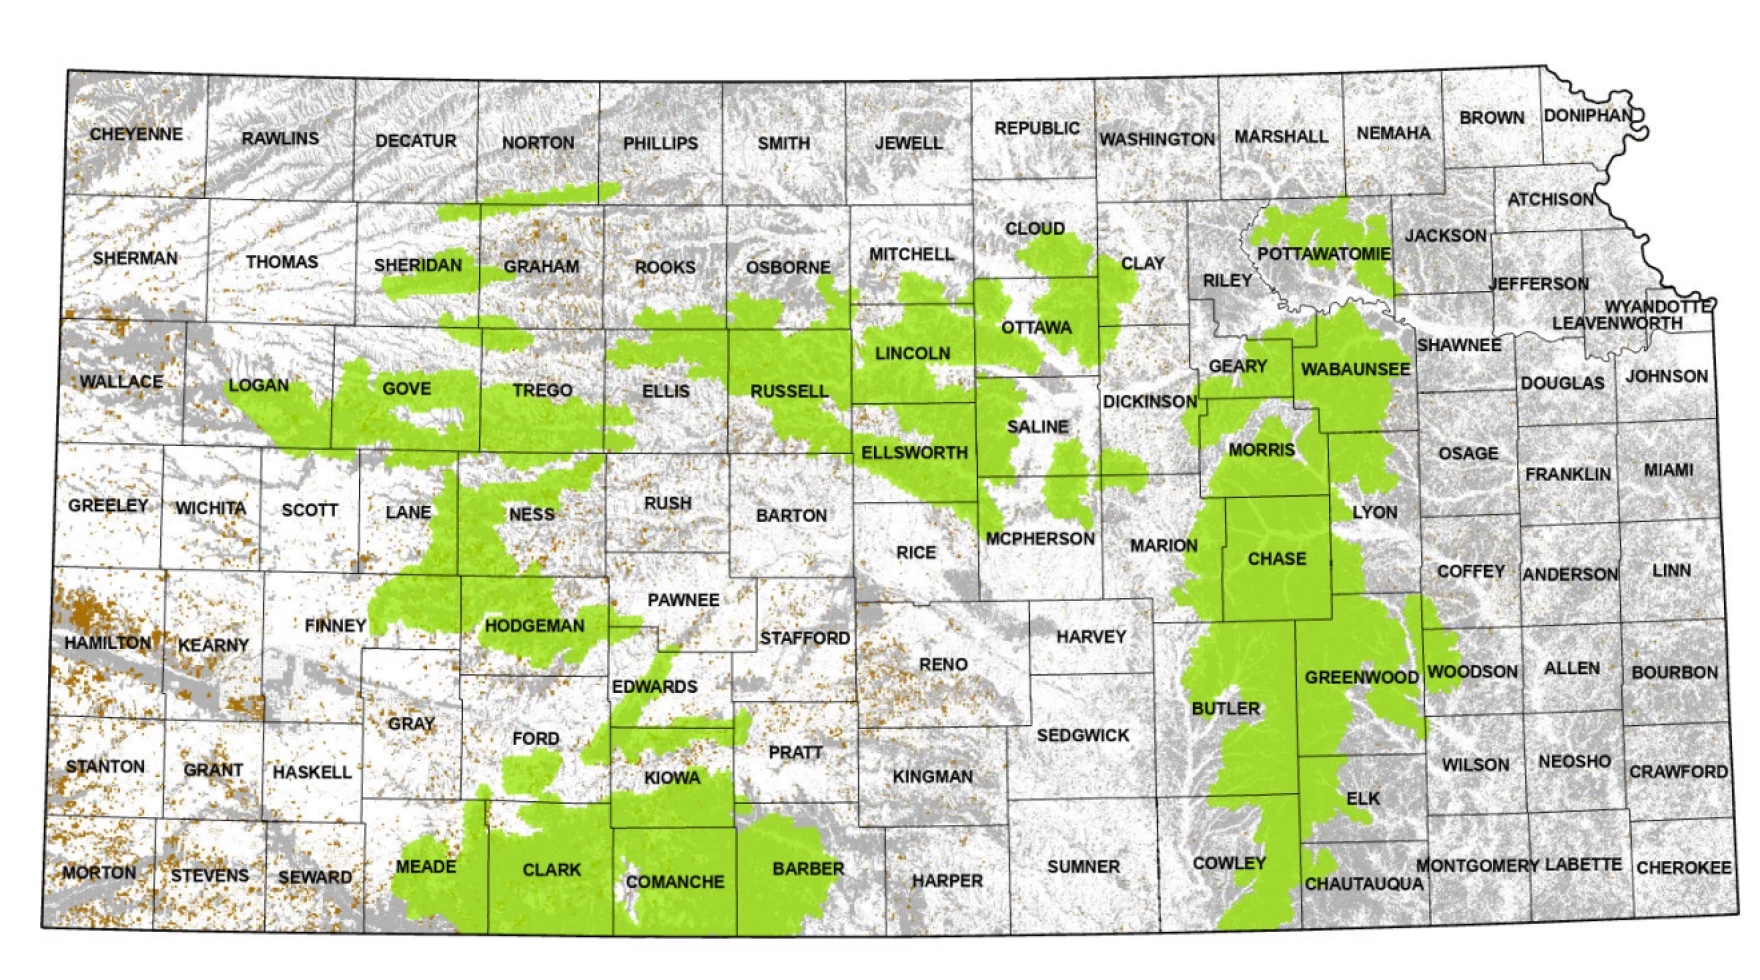 Patches of green covering different Kansas areas on a map of Kansas.